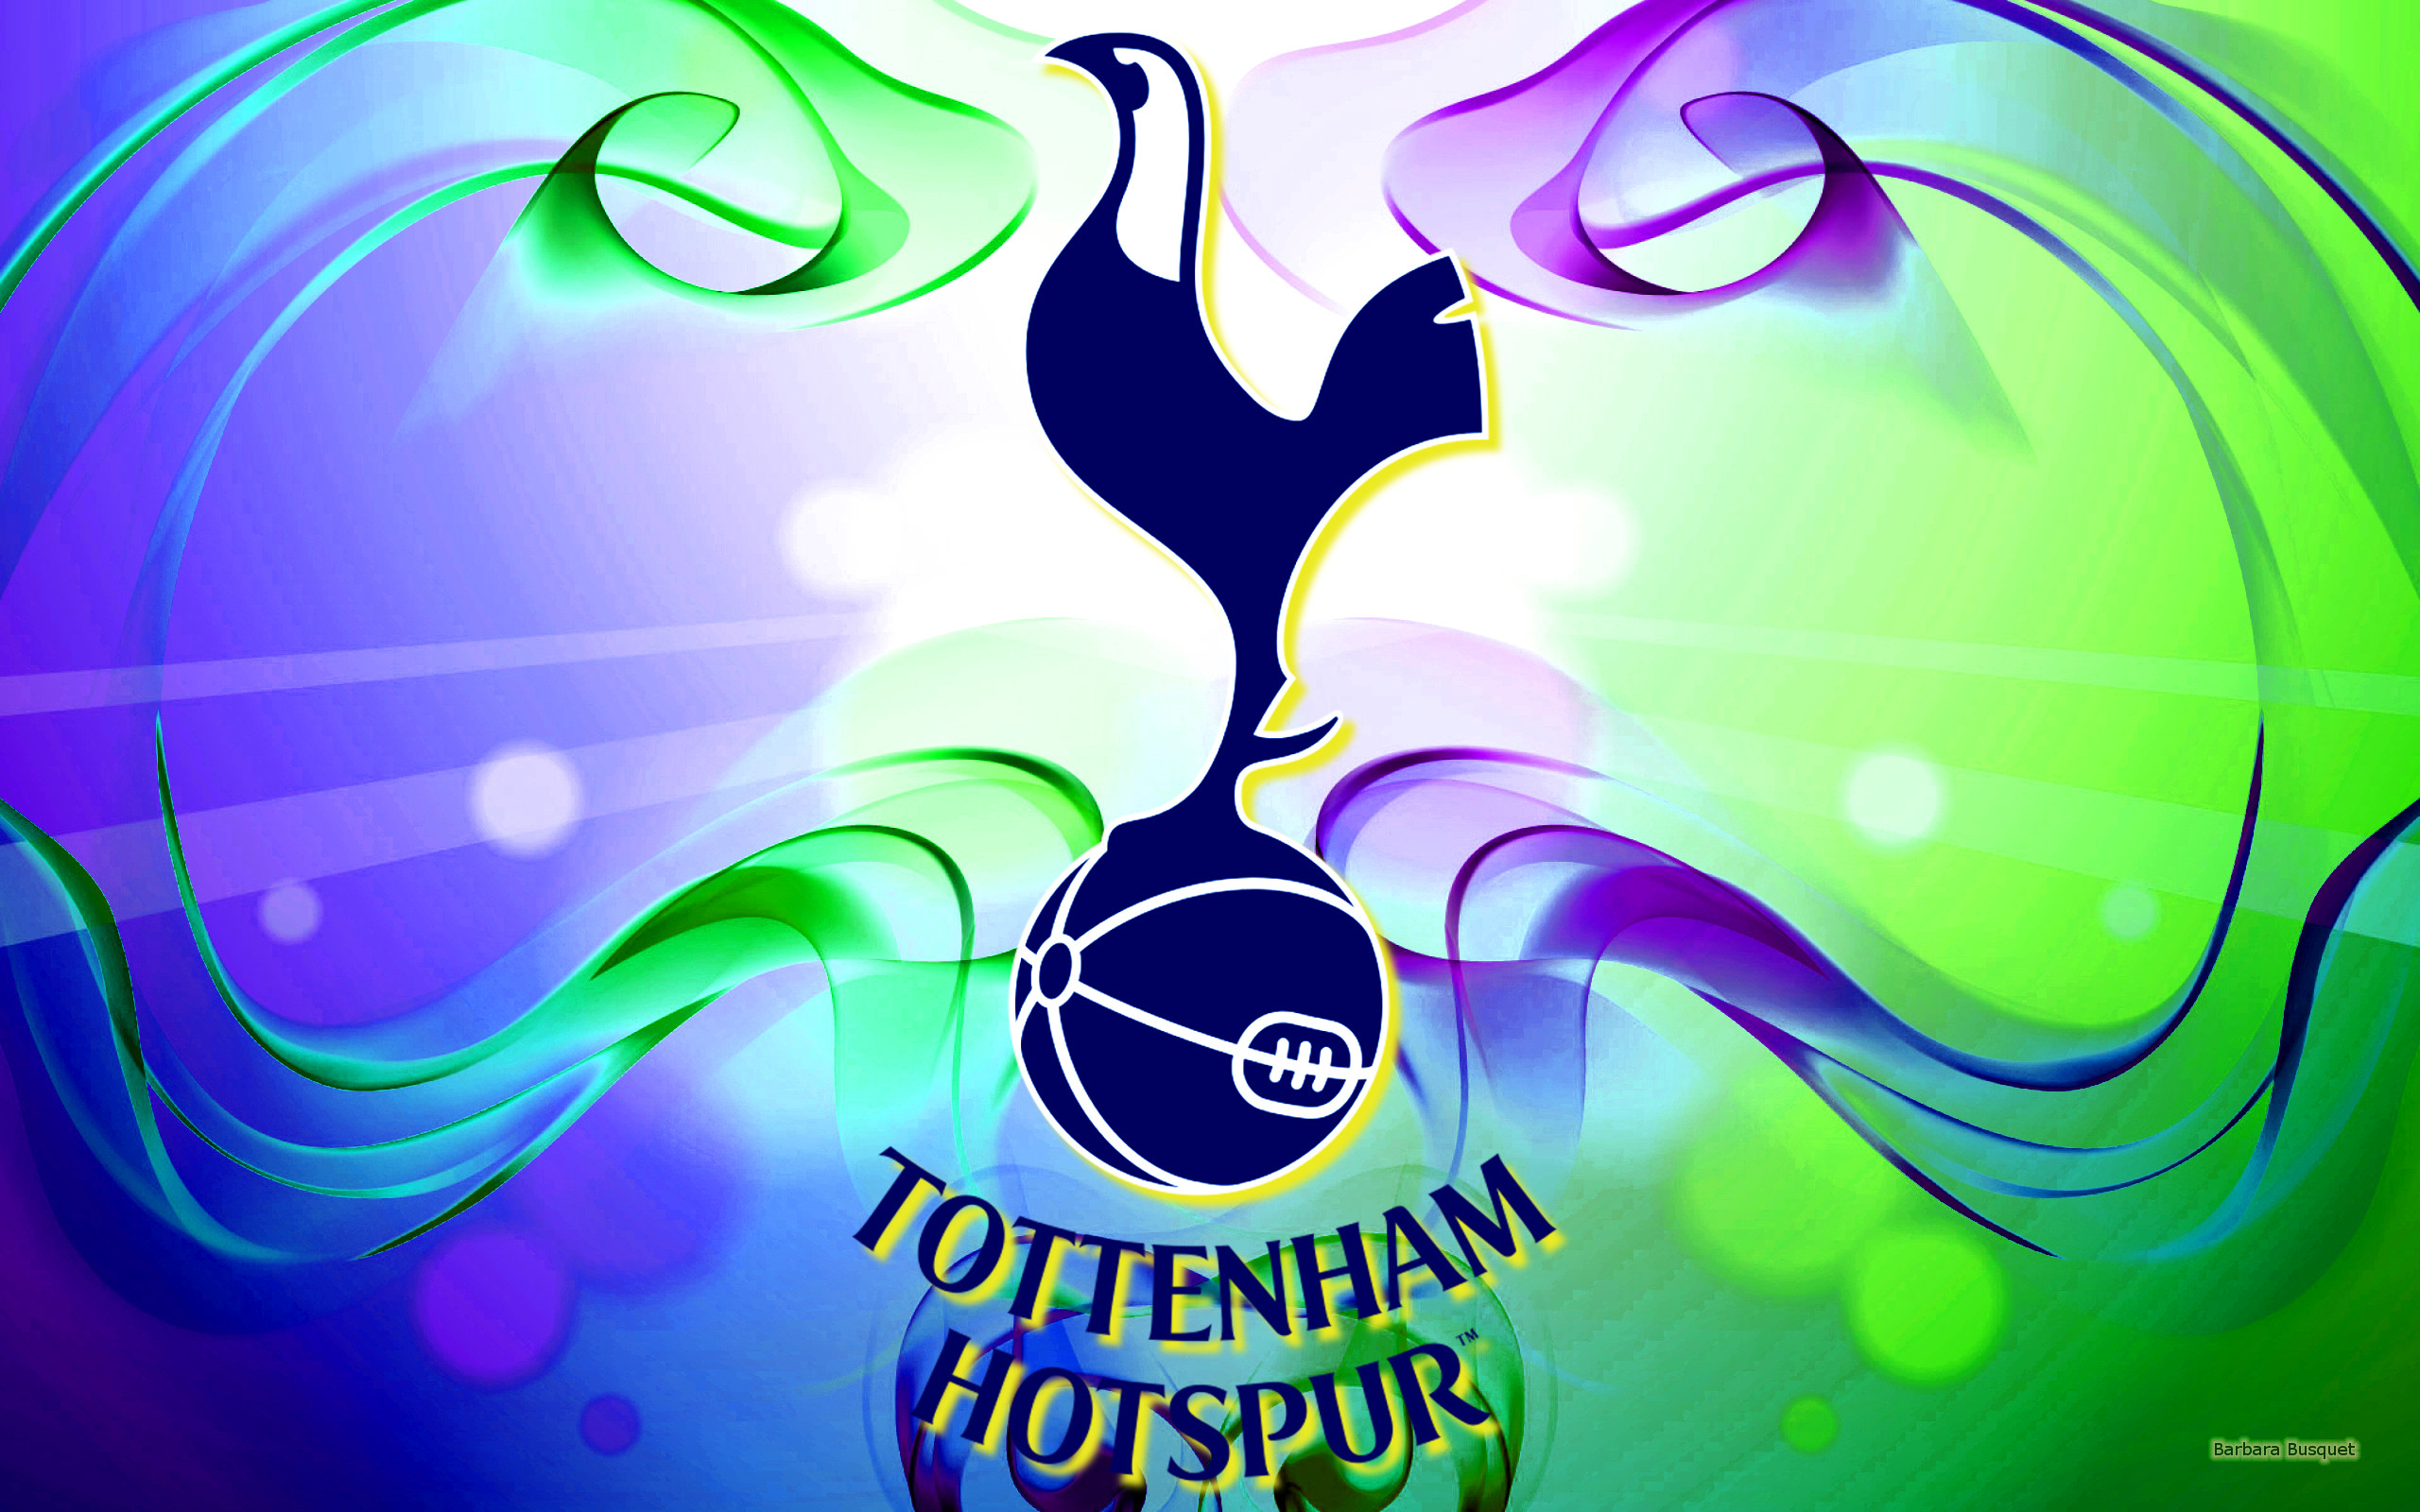 Tottenham hotspur fc hd papers and backgrounds